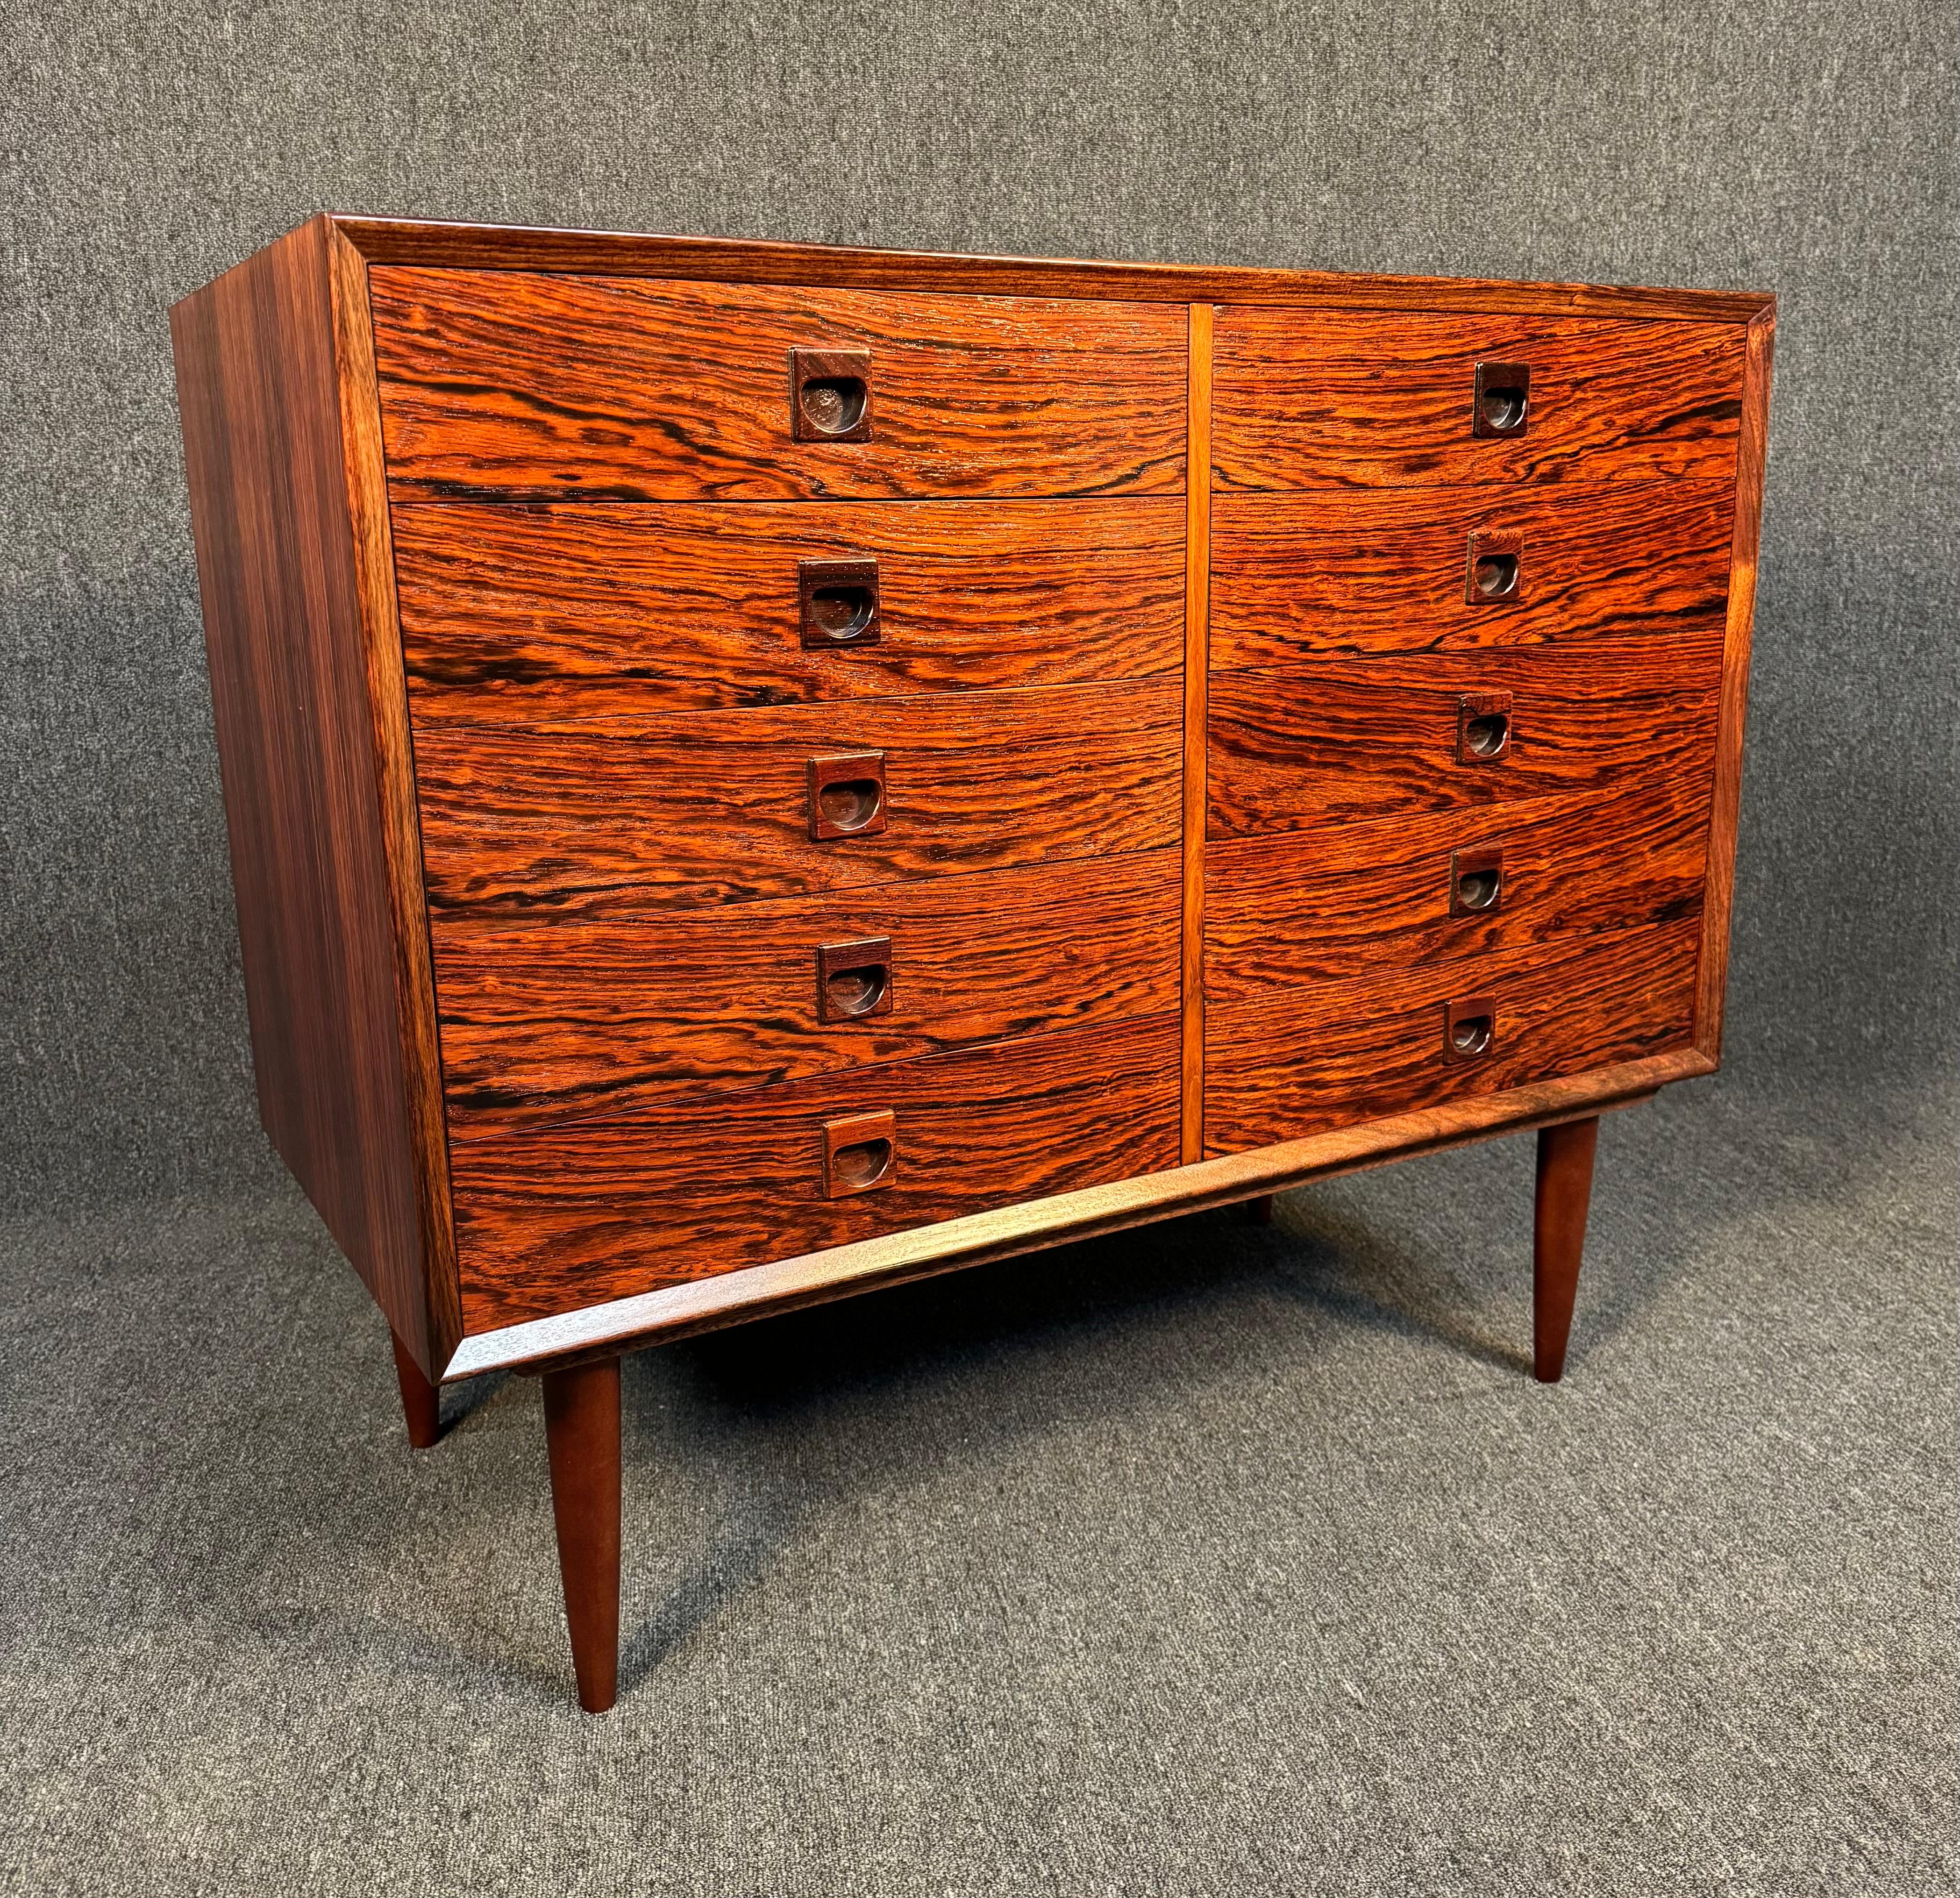 Vintage Danish Mid Century Modern Rosewood Dresser by Brouer Mobelfabrik In Good Condition For Sale In San Marcos, CA